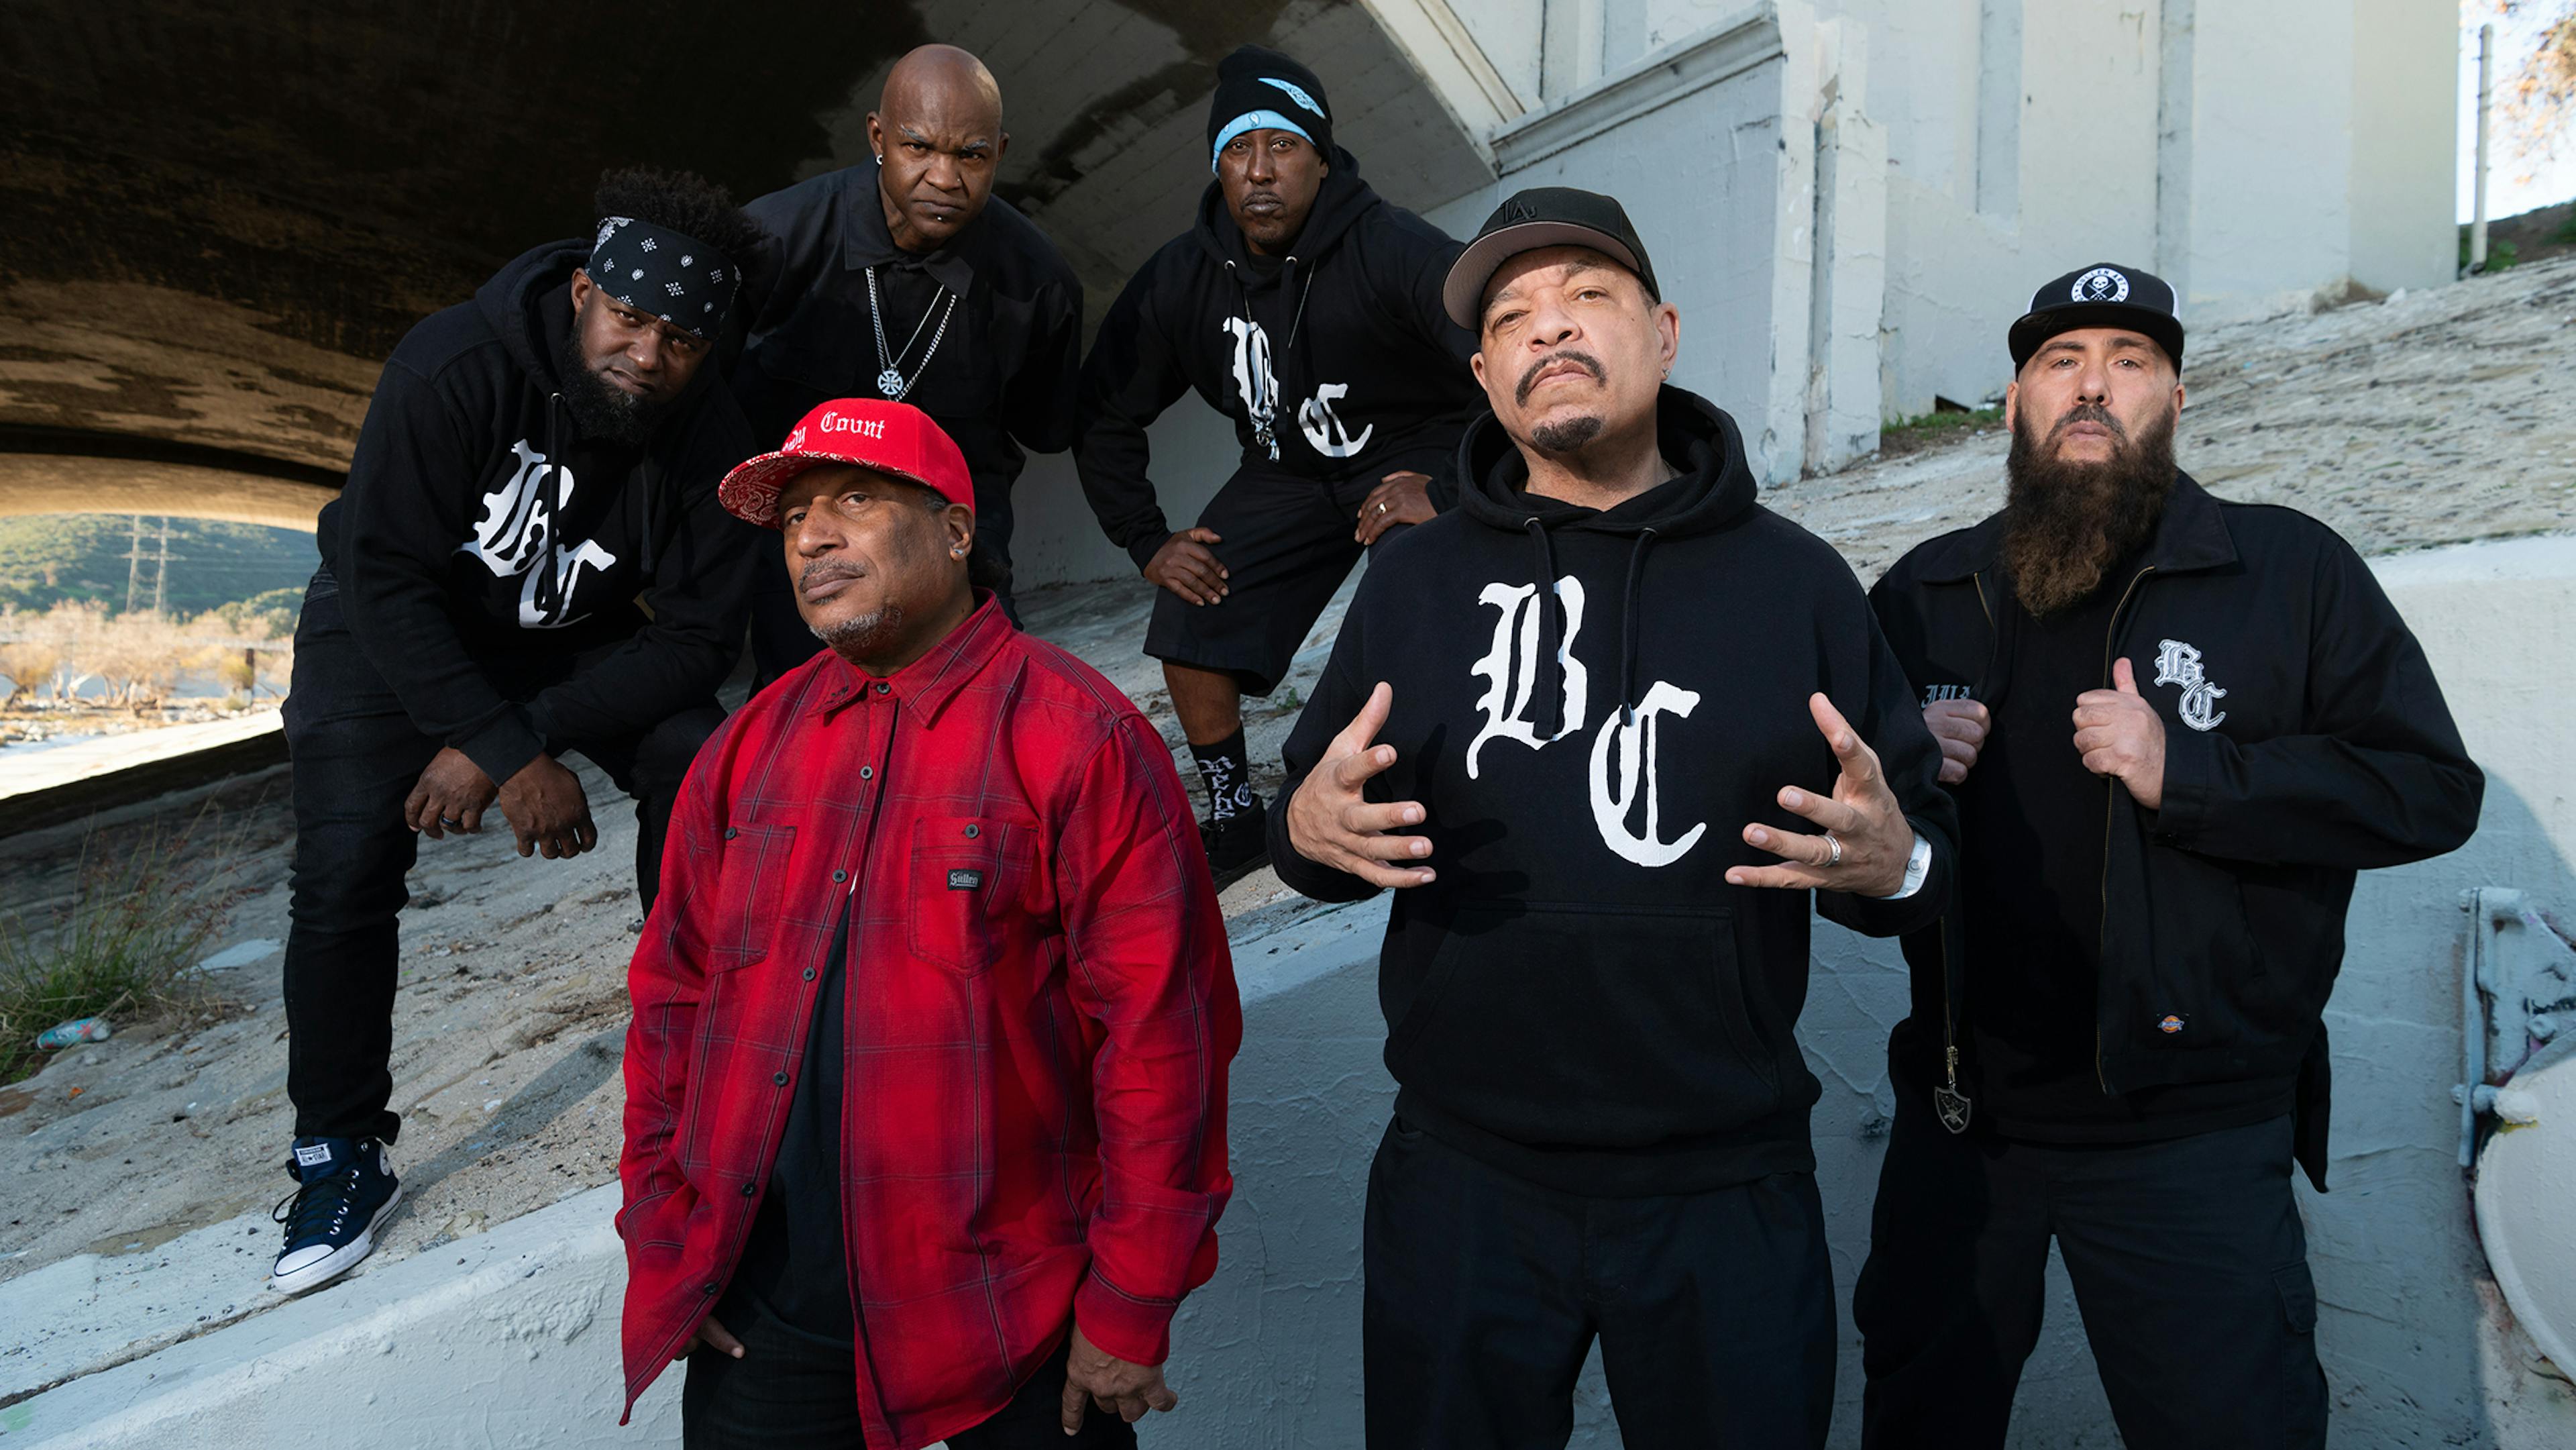 Body Count’s Ice-T: “I’m always going to be hardcore, I’m always going to push the line. It’s what I enjoy doing”